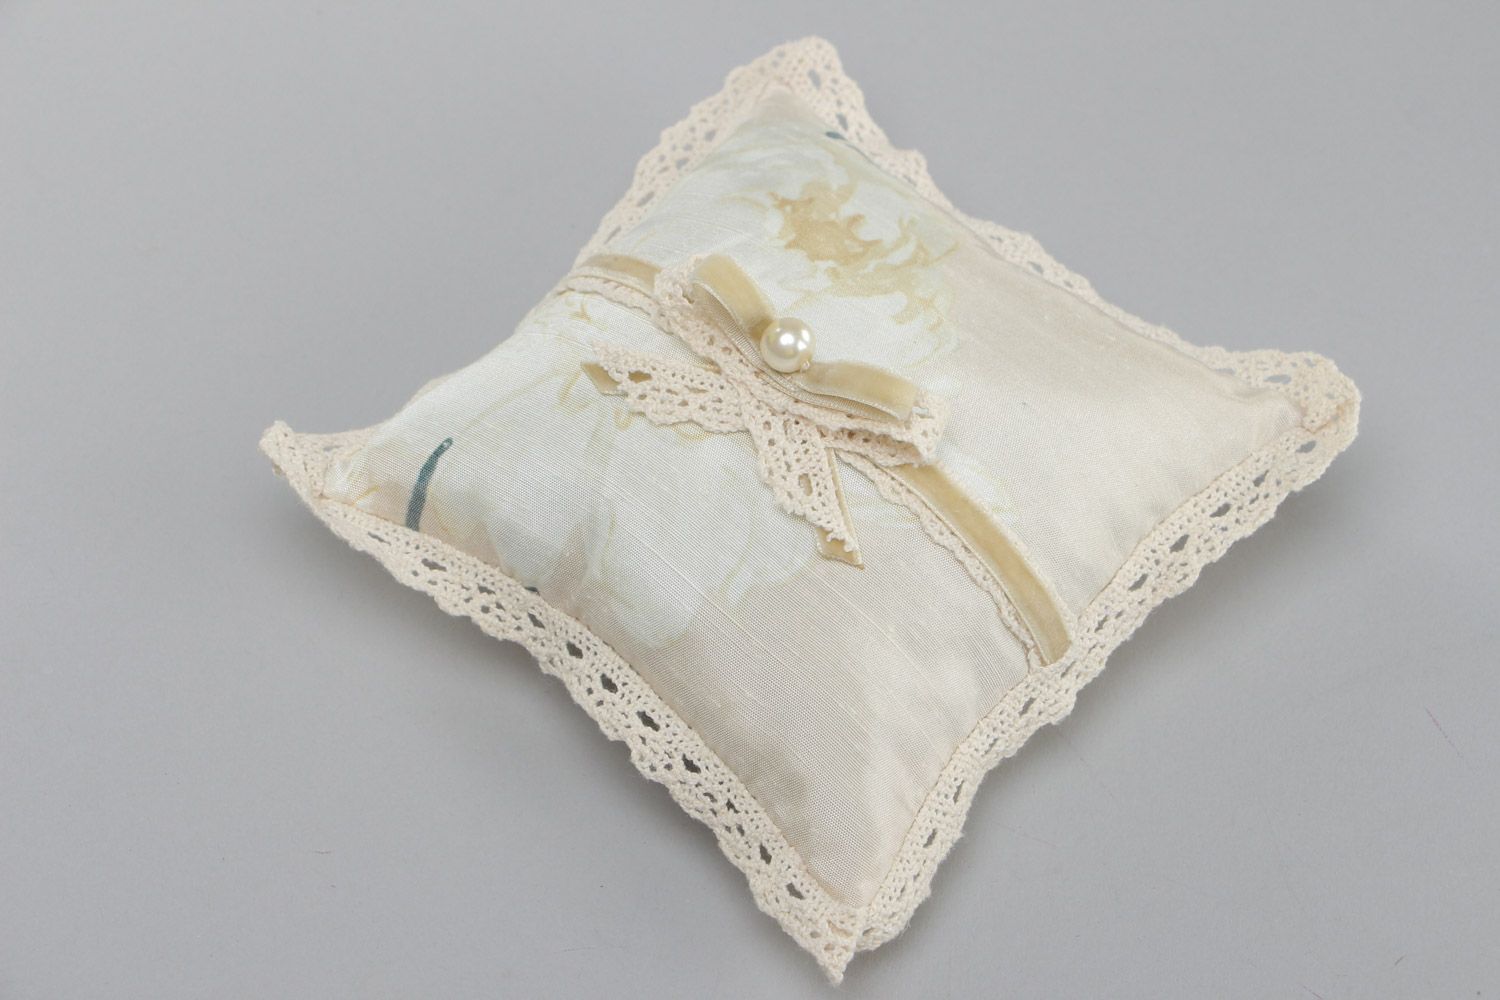 Handmade wedding ring bearer pillow sewn of ivory-colored silk fabric with bow photo 2